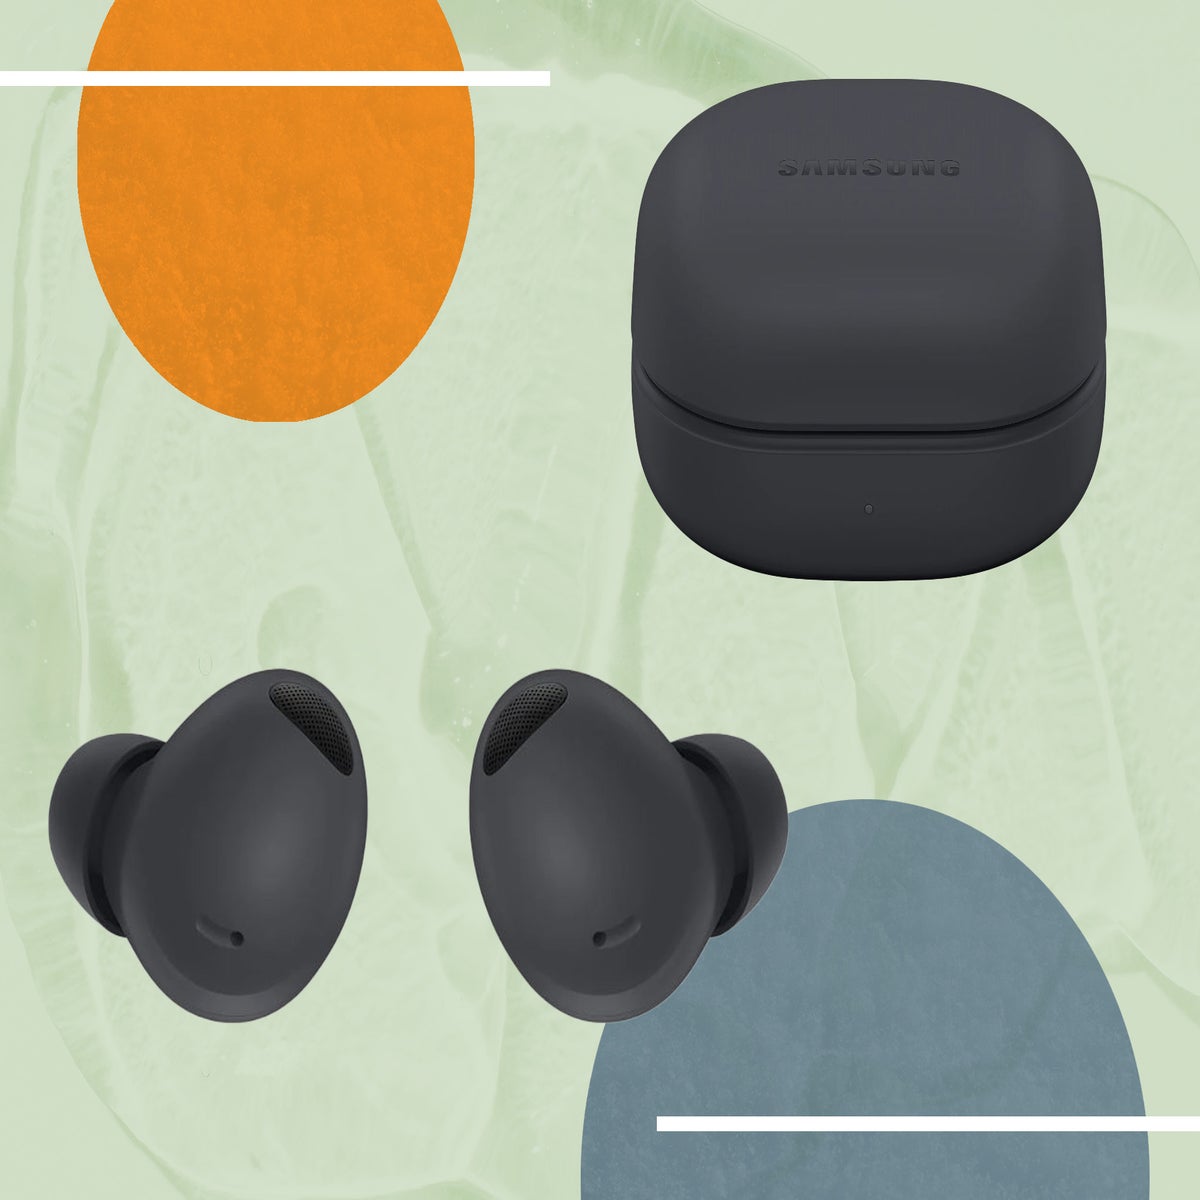 Samsung Galaxy Buds 2 Pro review: well-designed earbuds but